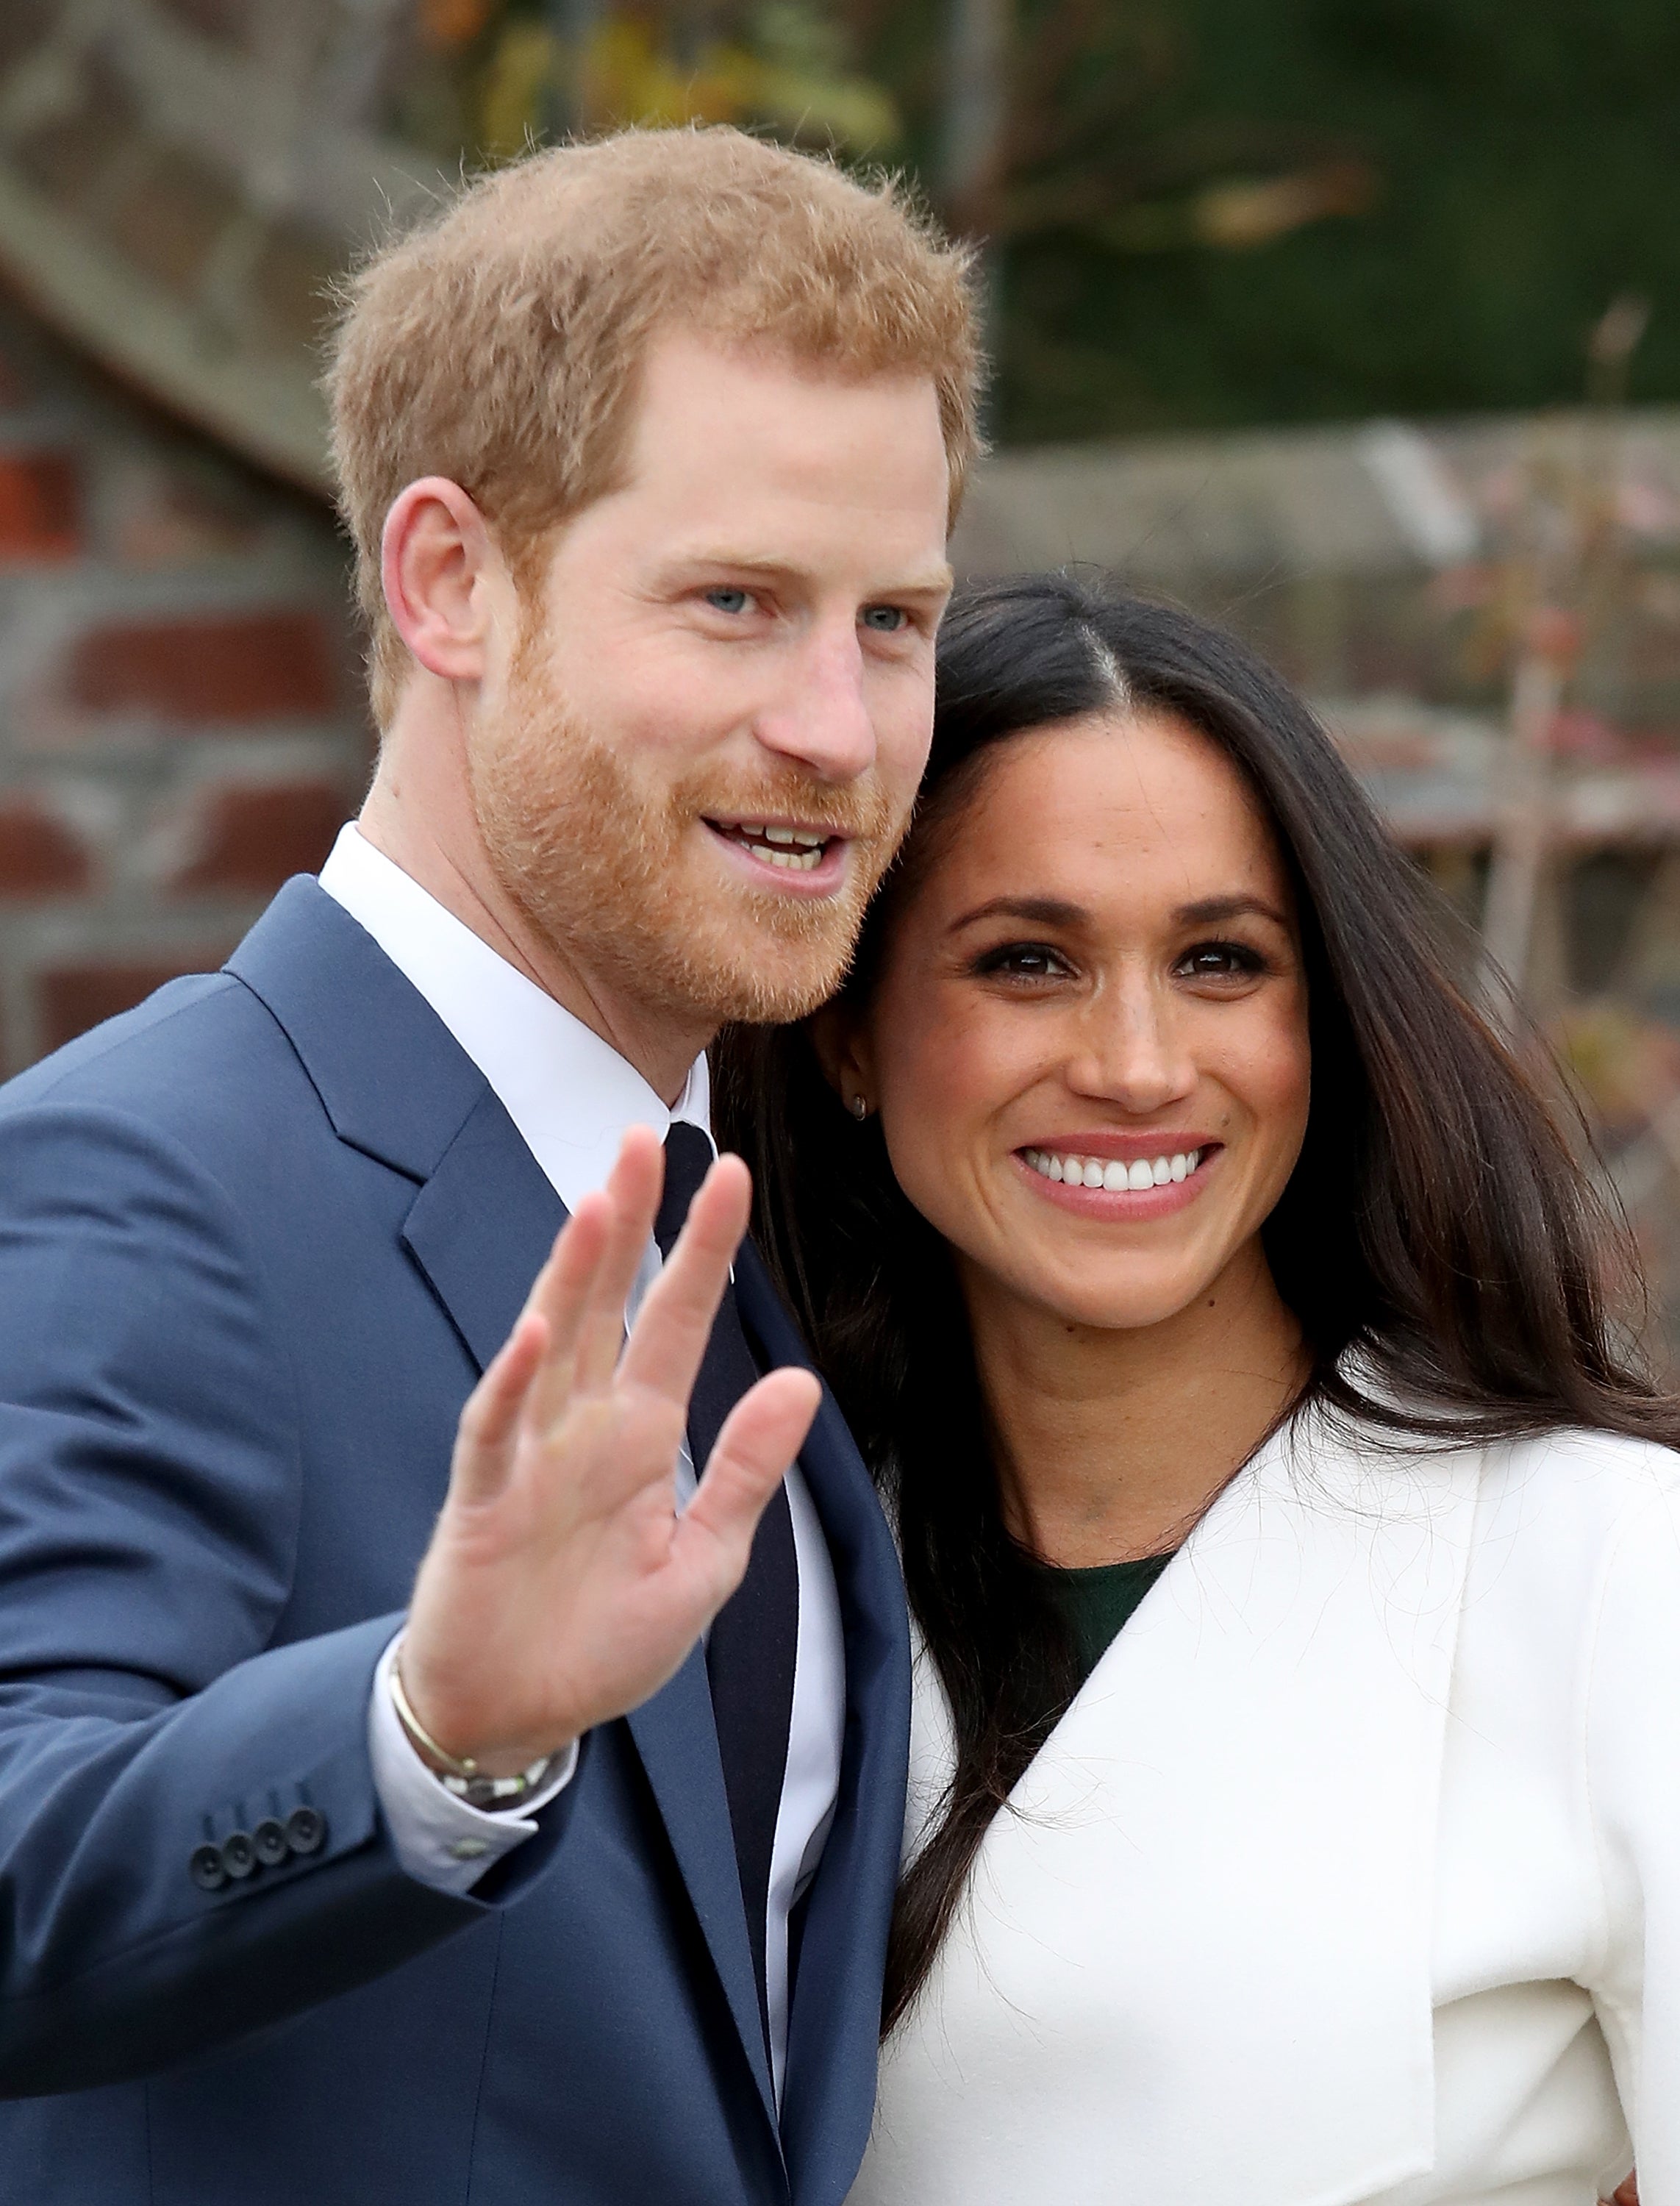 Prince Harry And Meghan Markle Received A Racist Letter Filled With Suspicious White Powder
